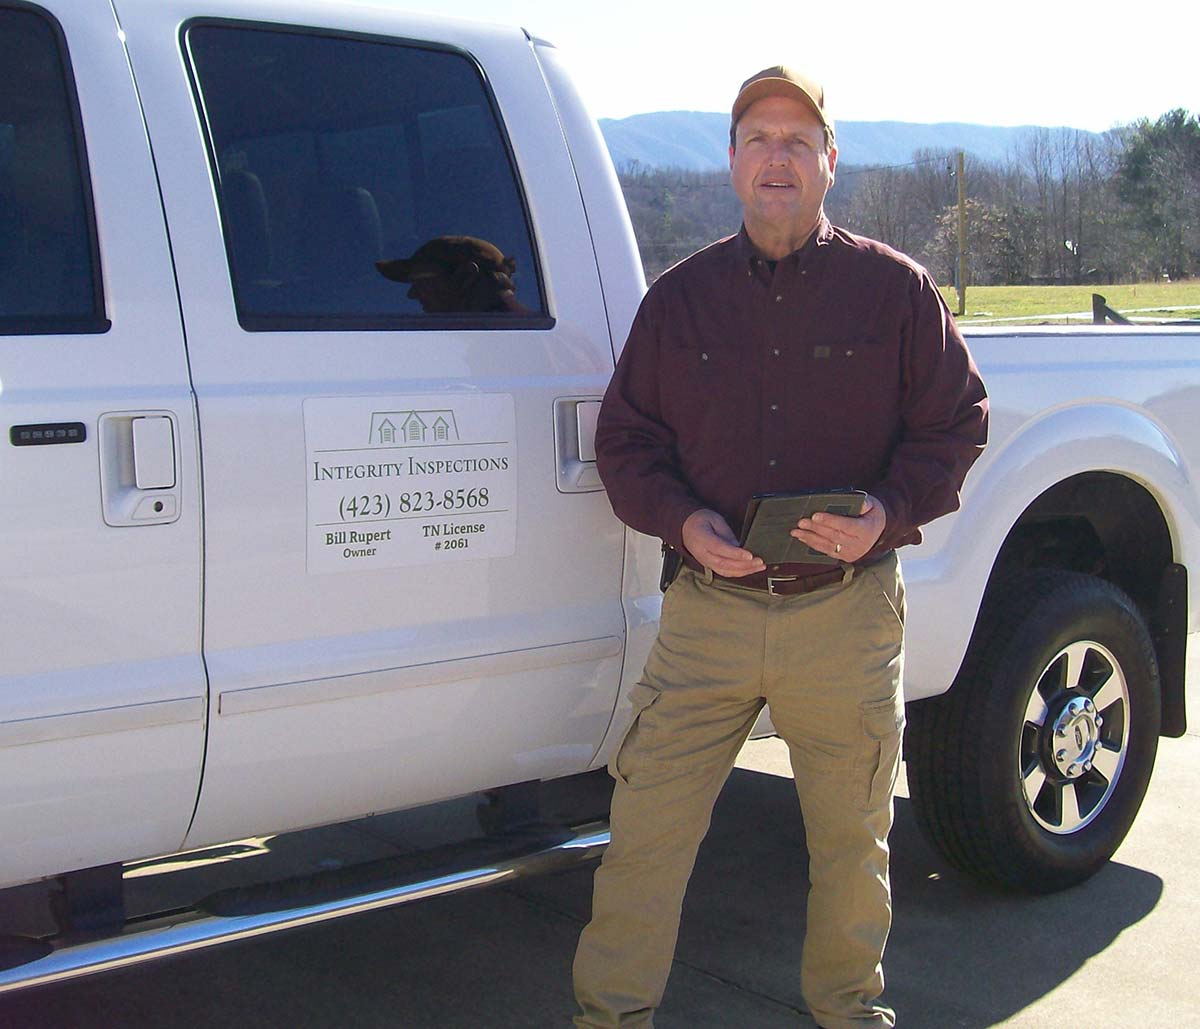 Bill Rupert, one of Integrity's home inspectors, standing next to his truck